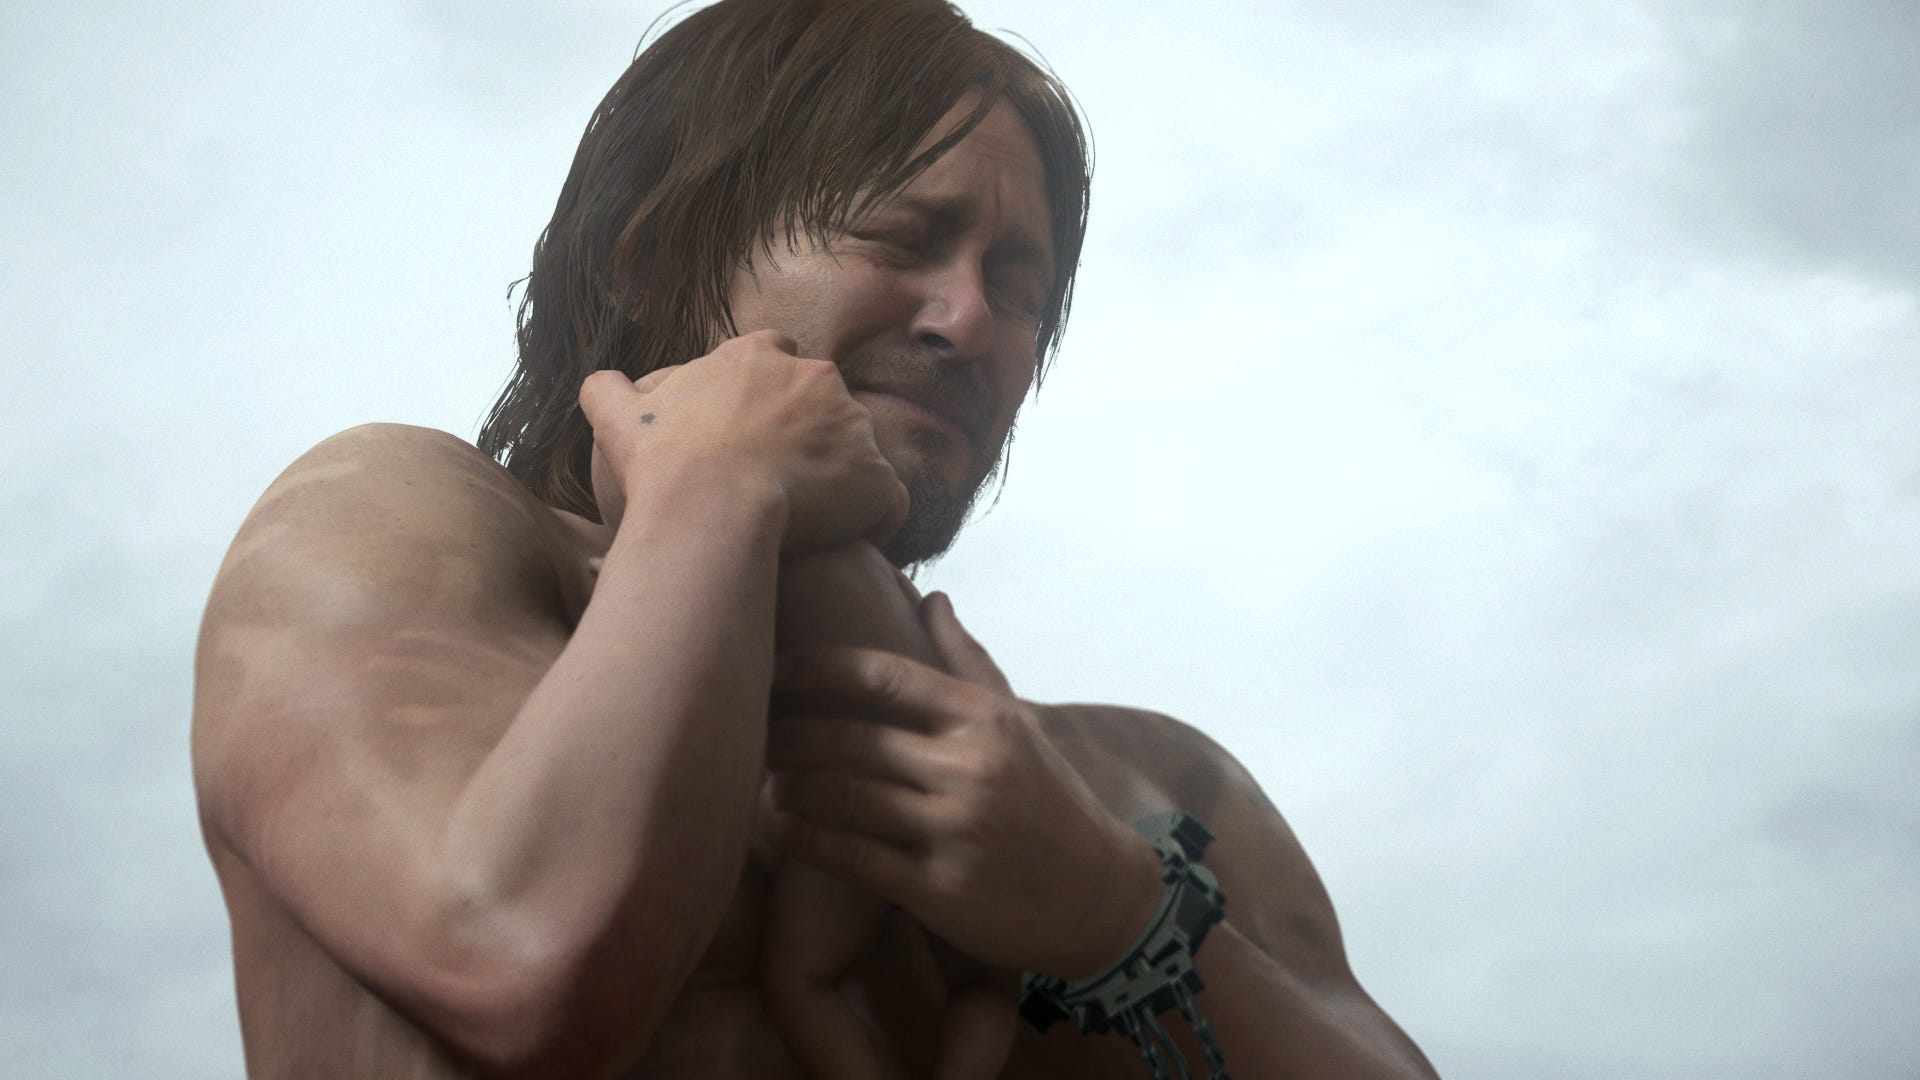 Death Stranding is Hideo Kojima's take on Internet toxicity. And